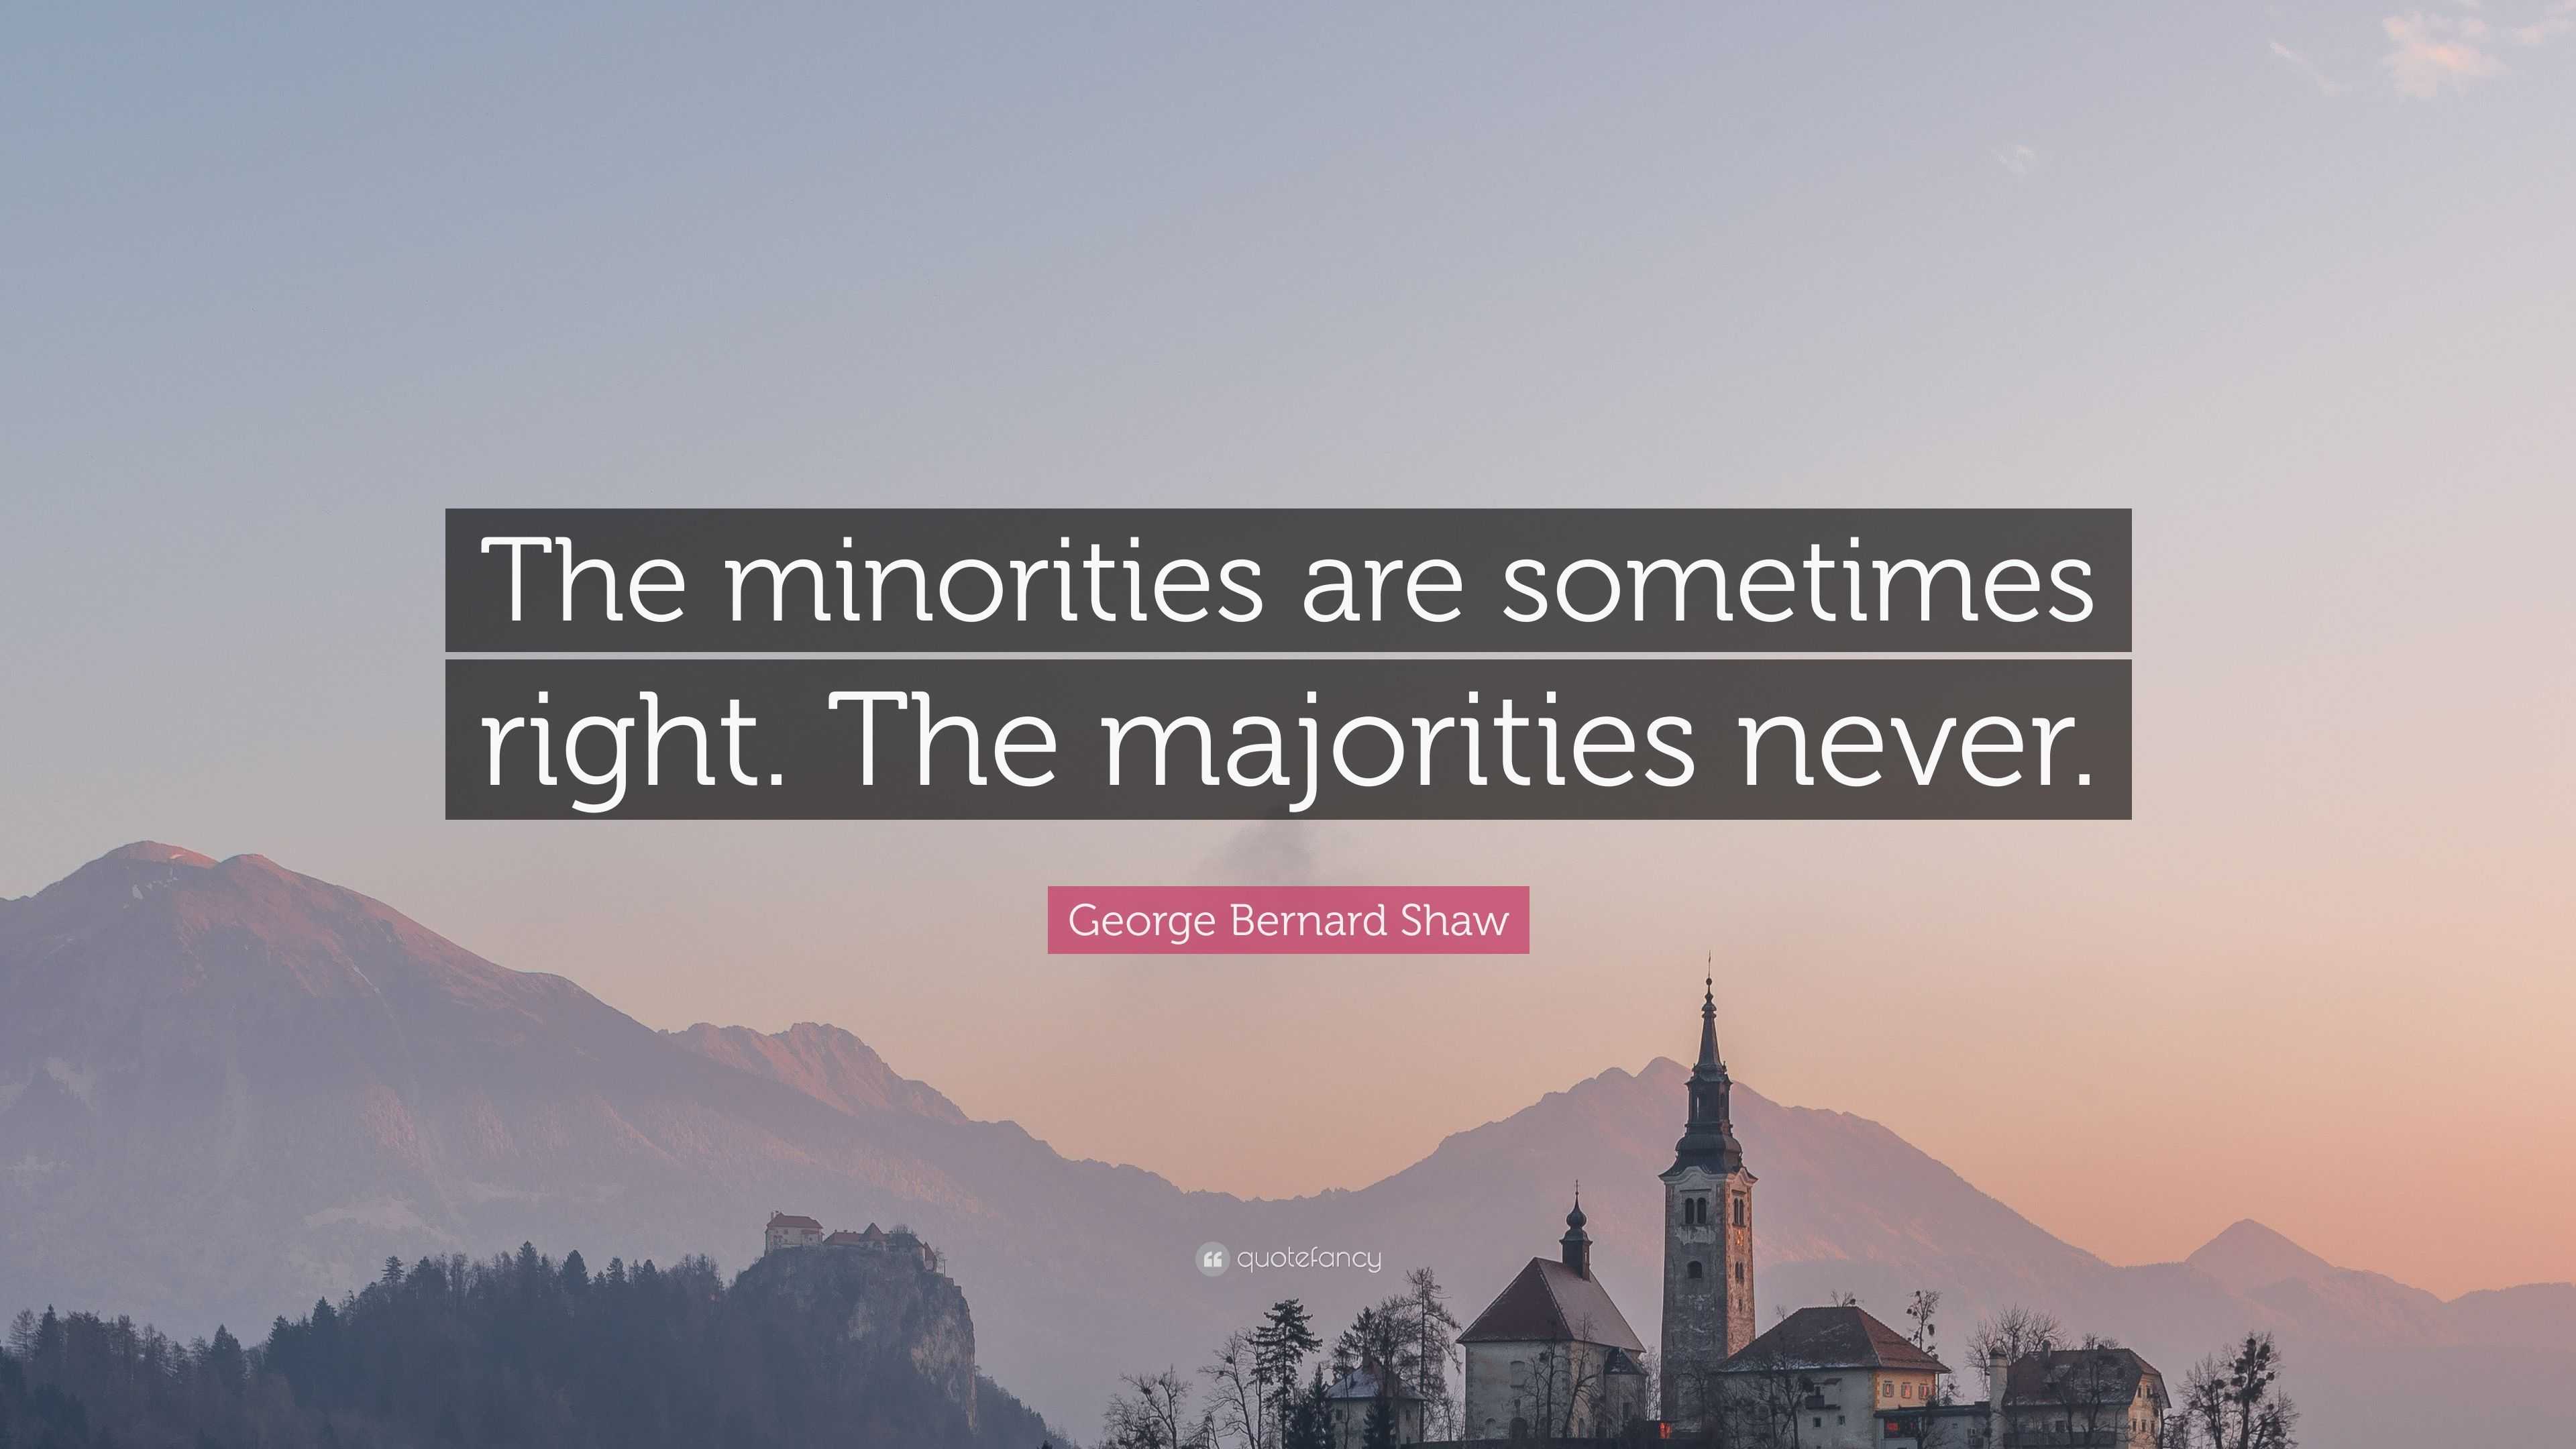 George Bernard Shaw Quote: “The minorities are sometimes right. The